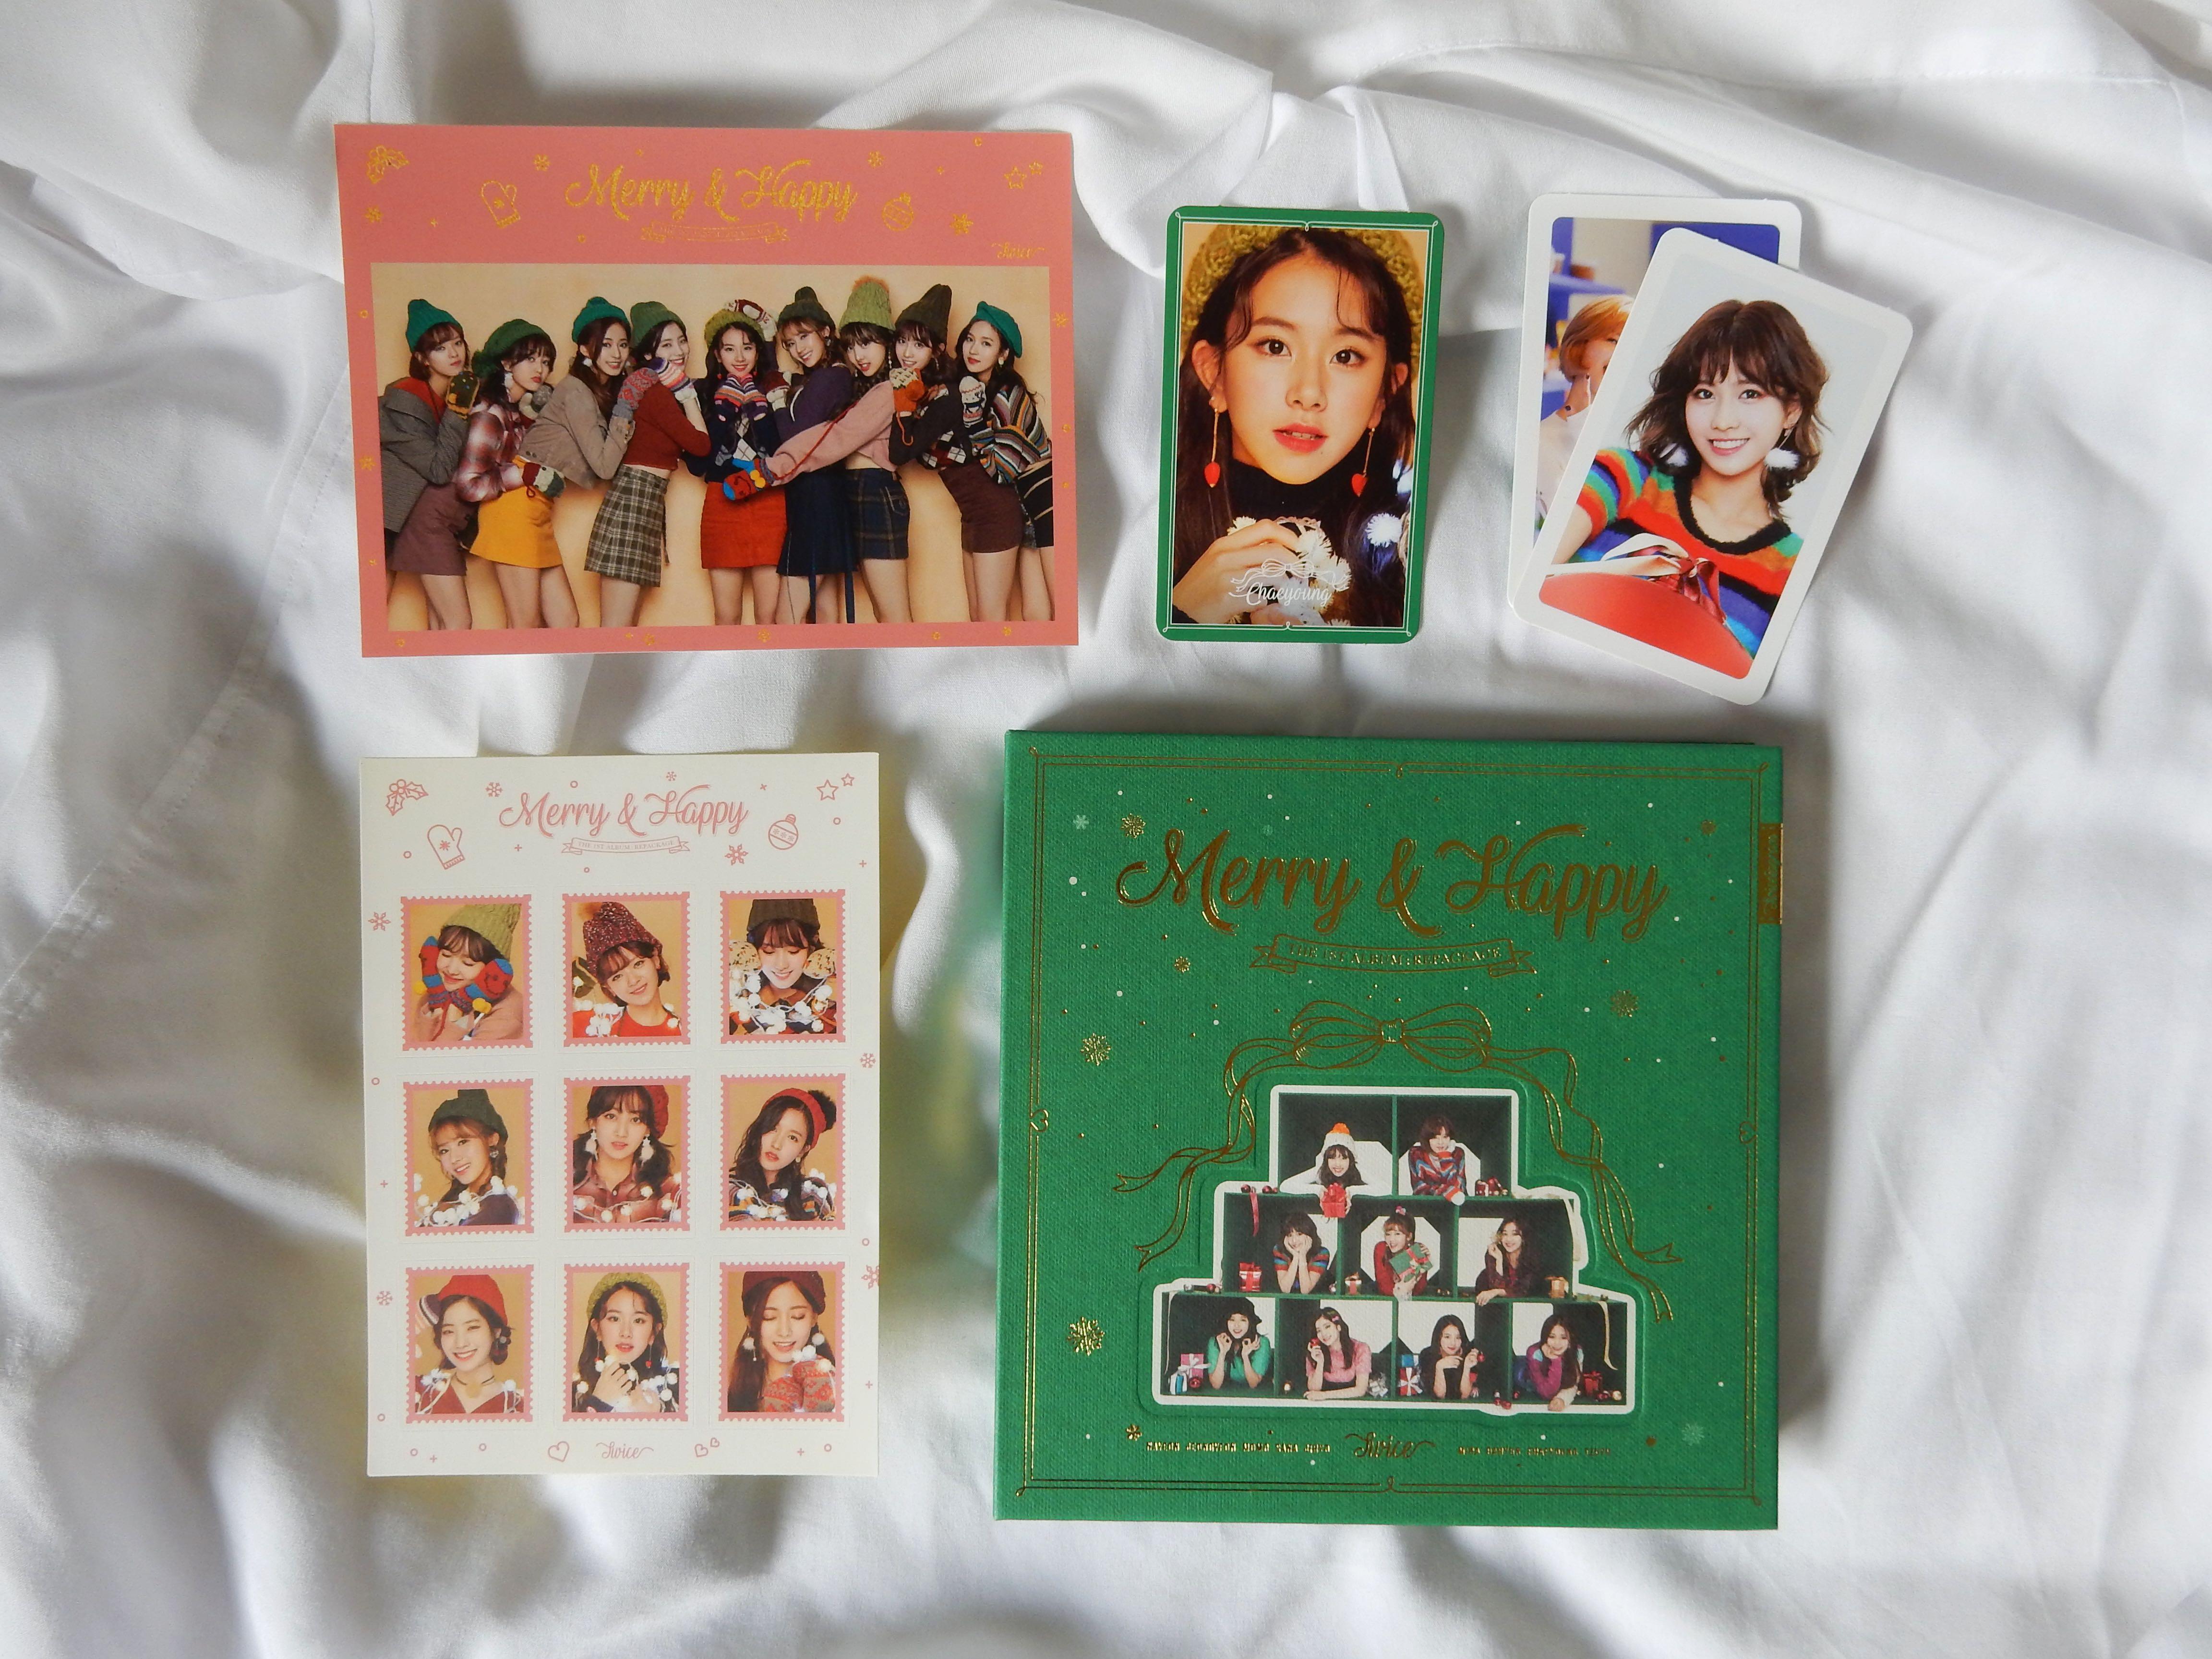 Twice Album Twice Merry Happy The 1st Album Repackage Hobbies Toys Memorabilia Collectibles K Wave On Carousell